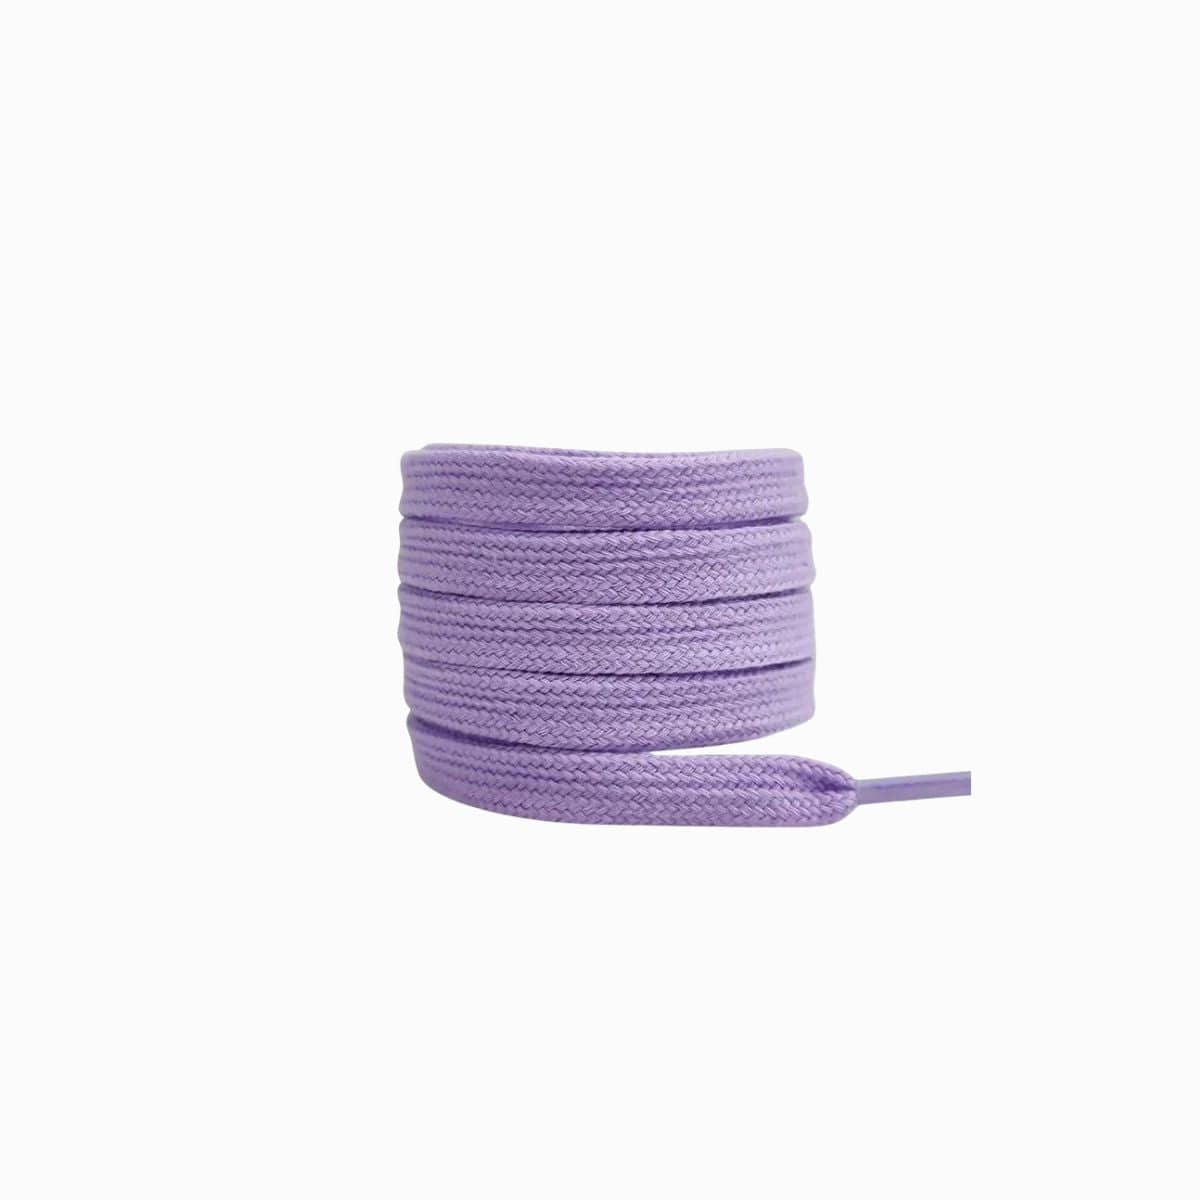 Light Purple Replacement Shoe Laces for Adidas Samba Sneakers by Kicks Shoelaces